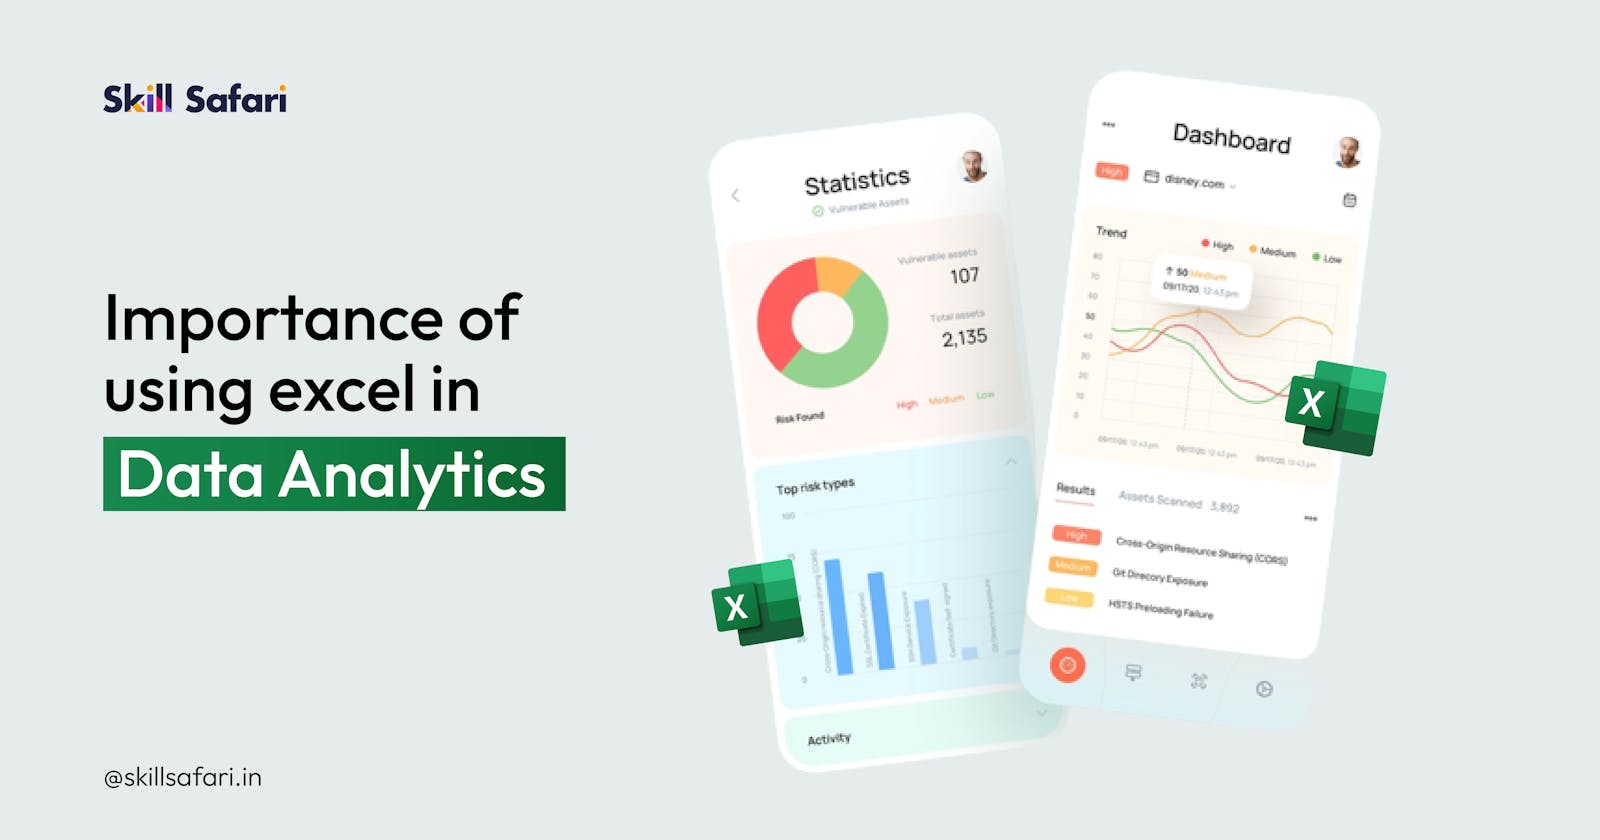 Importance of using excel in Data Analytics